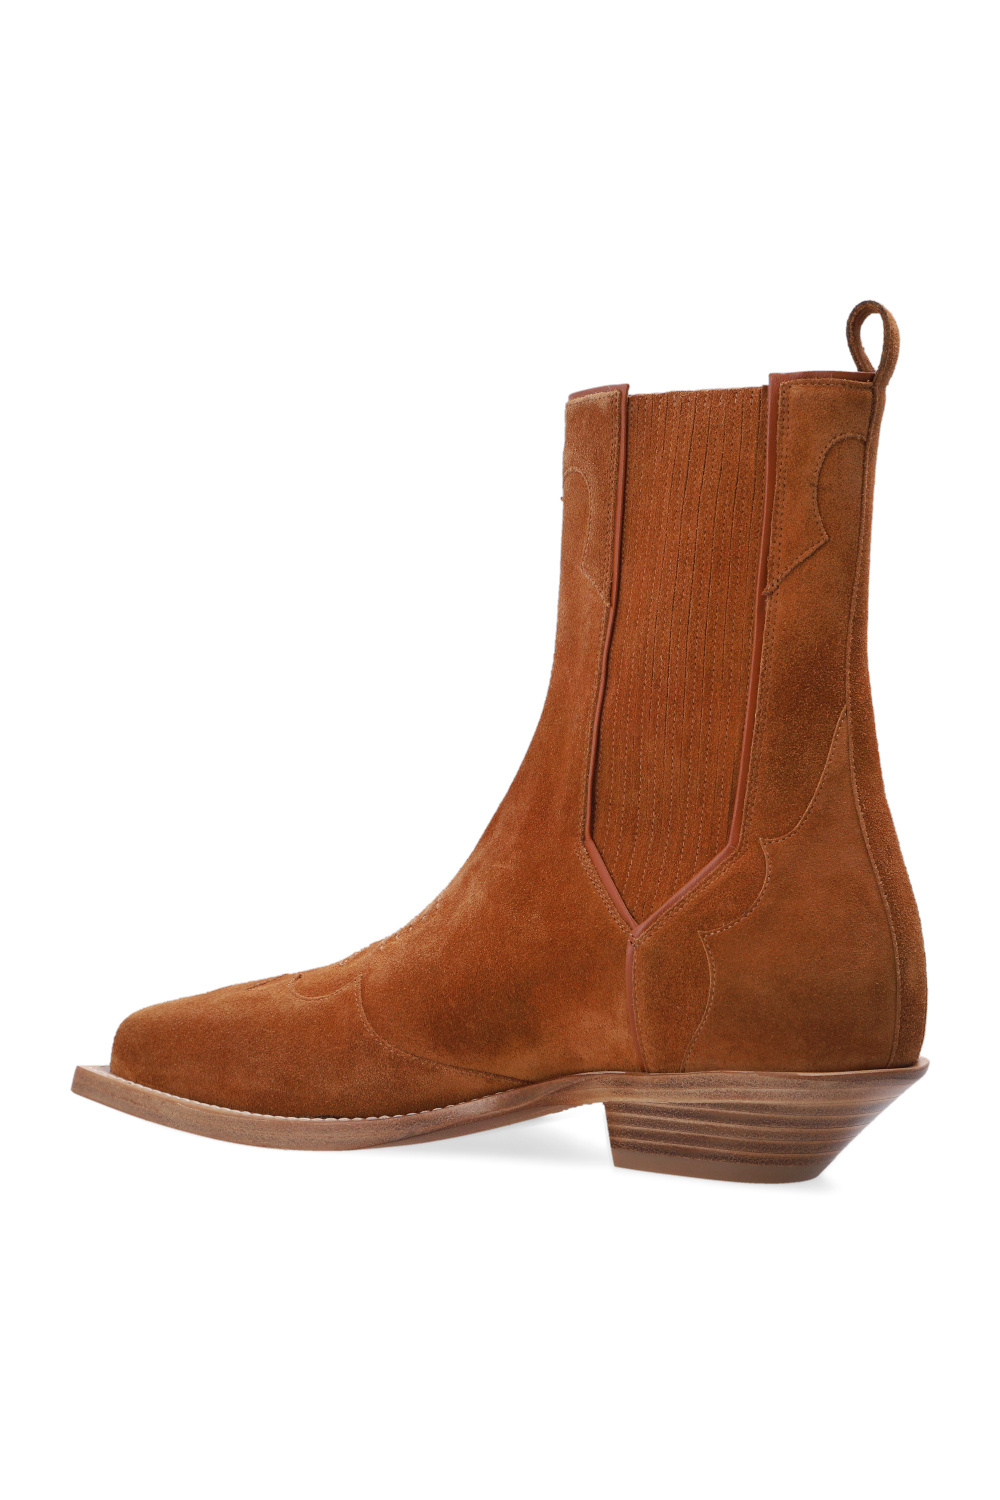 Balmain Suede heeled ankle boots